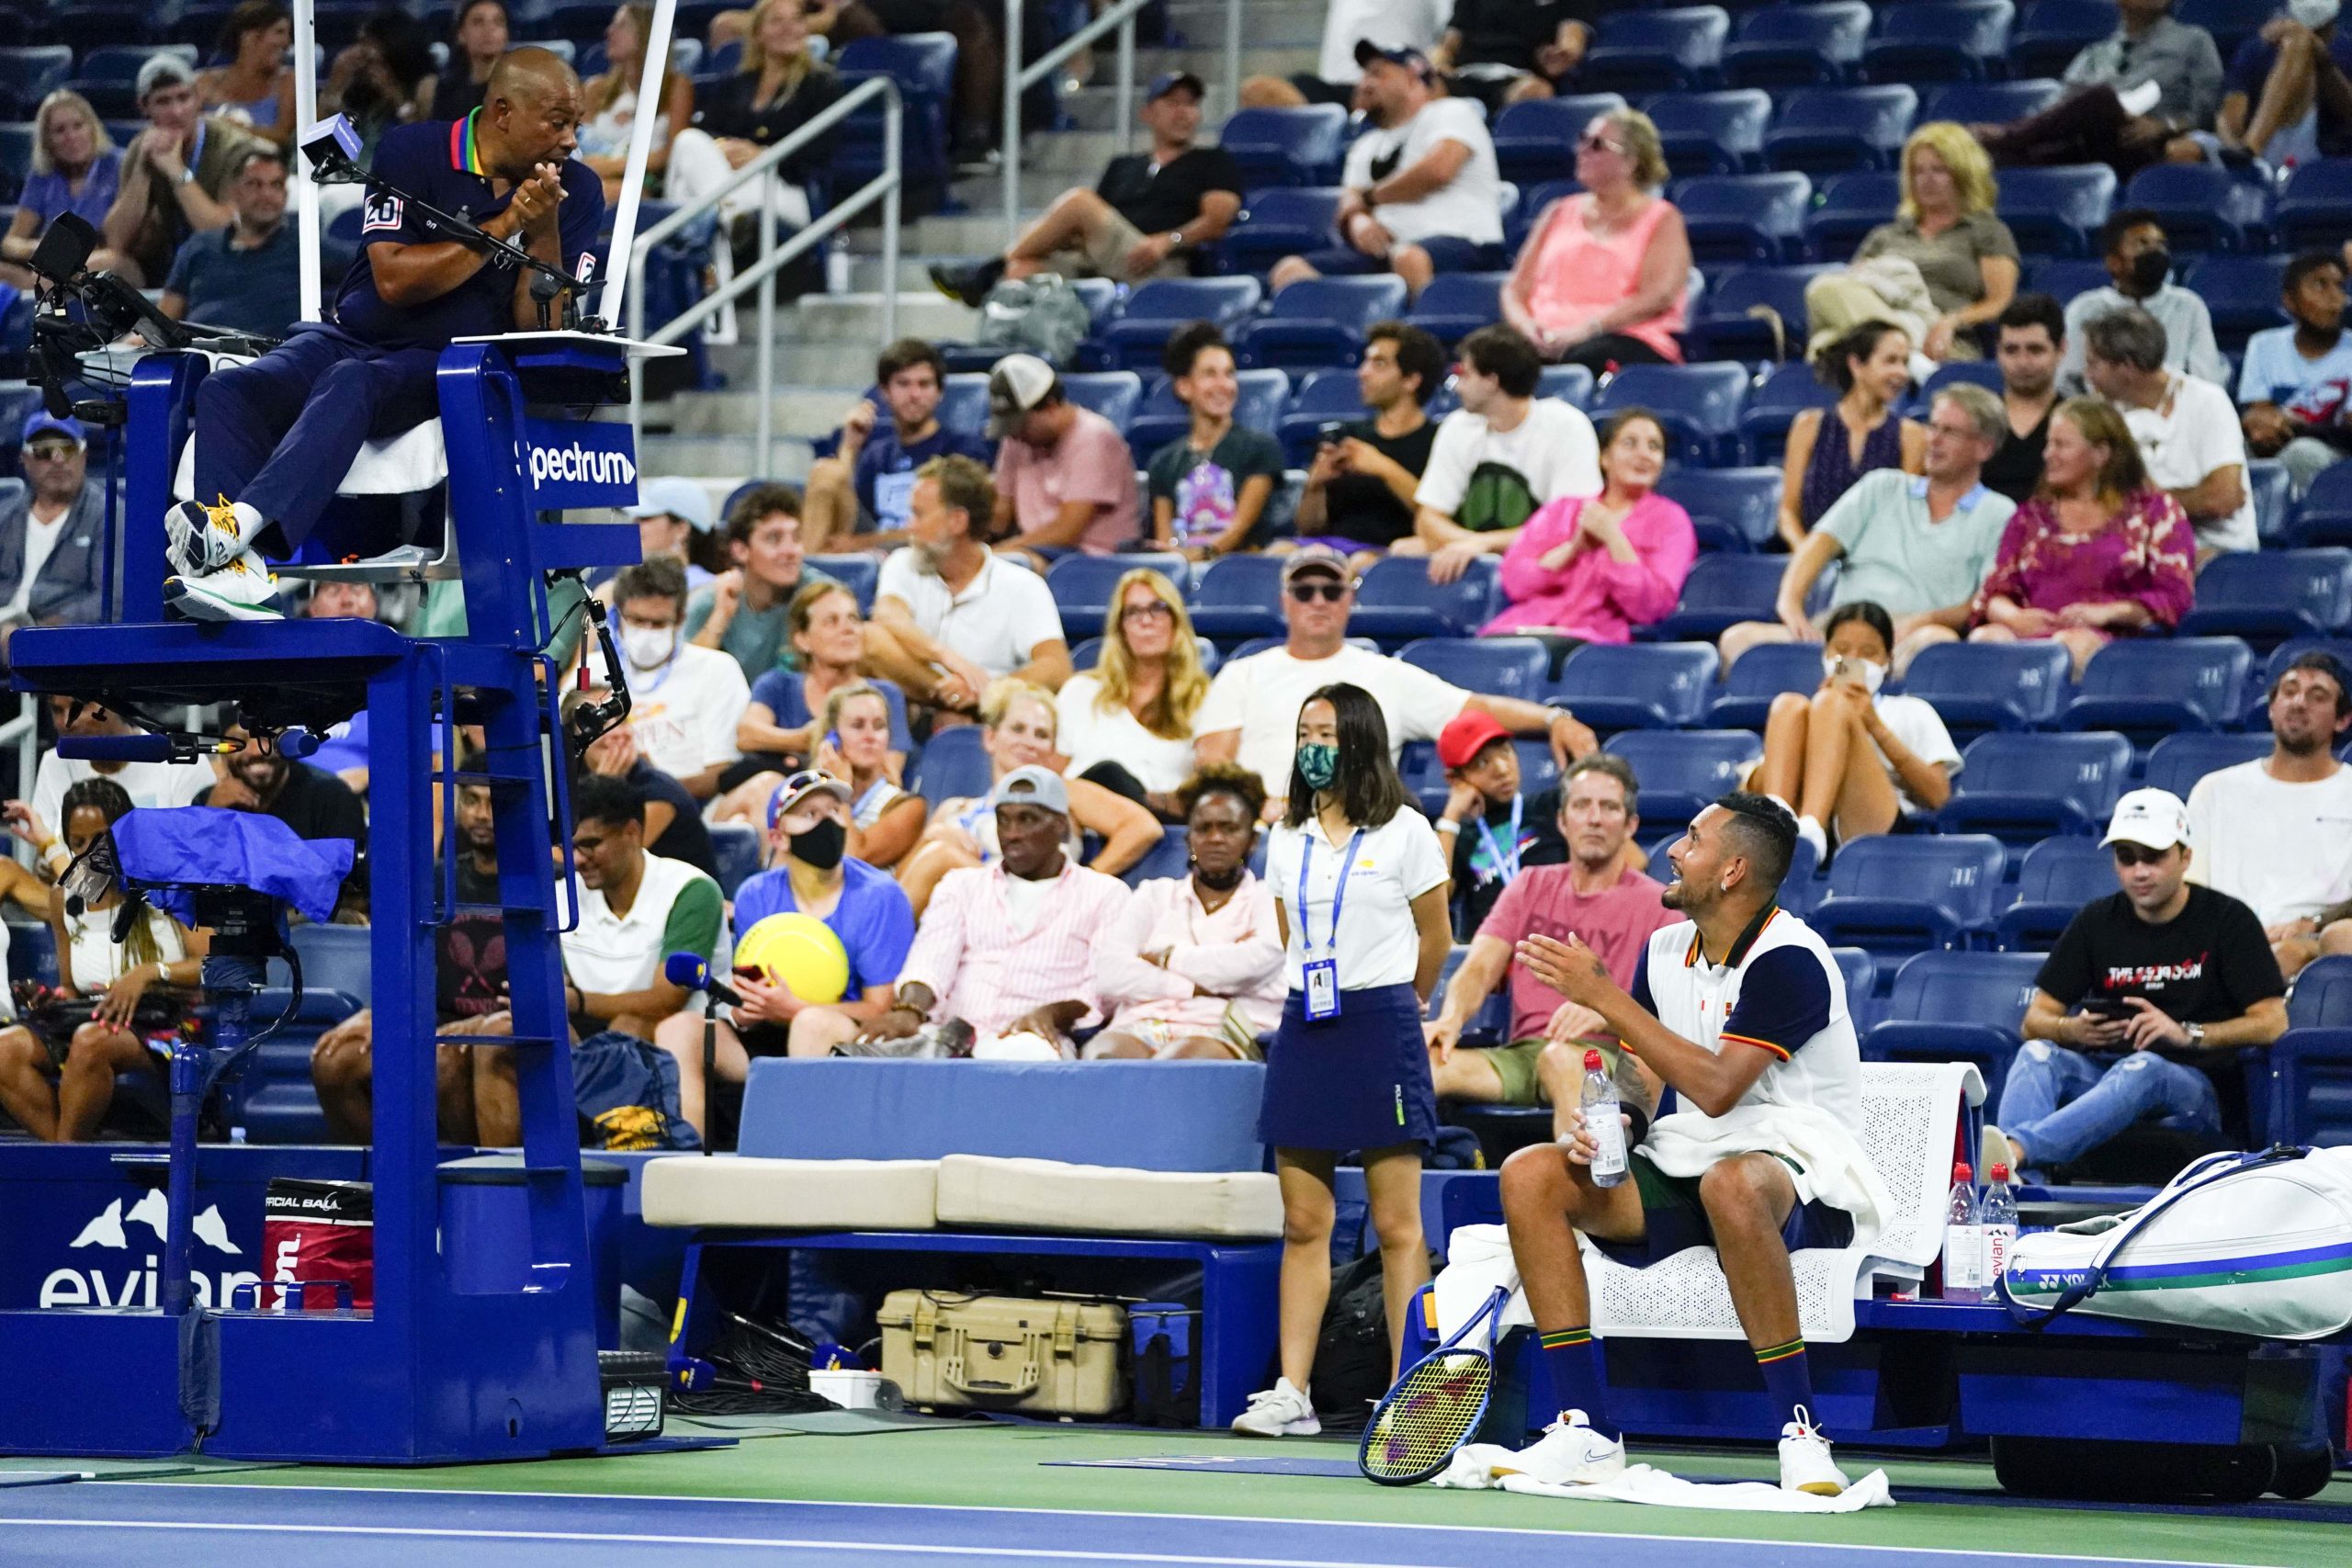 Nick Kyrgios of Australia and the chair umpire talk during the first round match against Roberto Bautista Agut of Spain on day one of the 2021 U.S. Open tennis tournament at USTA Billie King National Tennis Center.